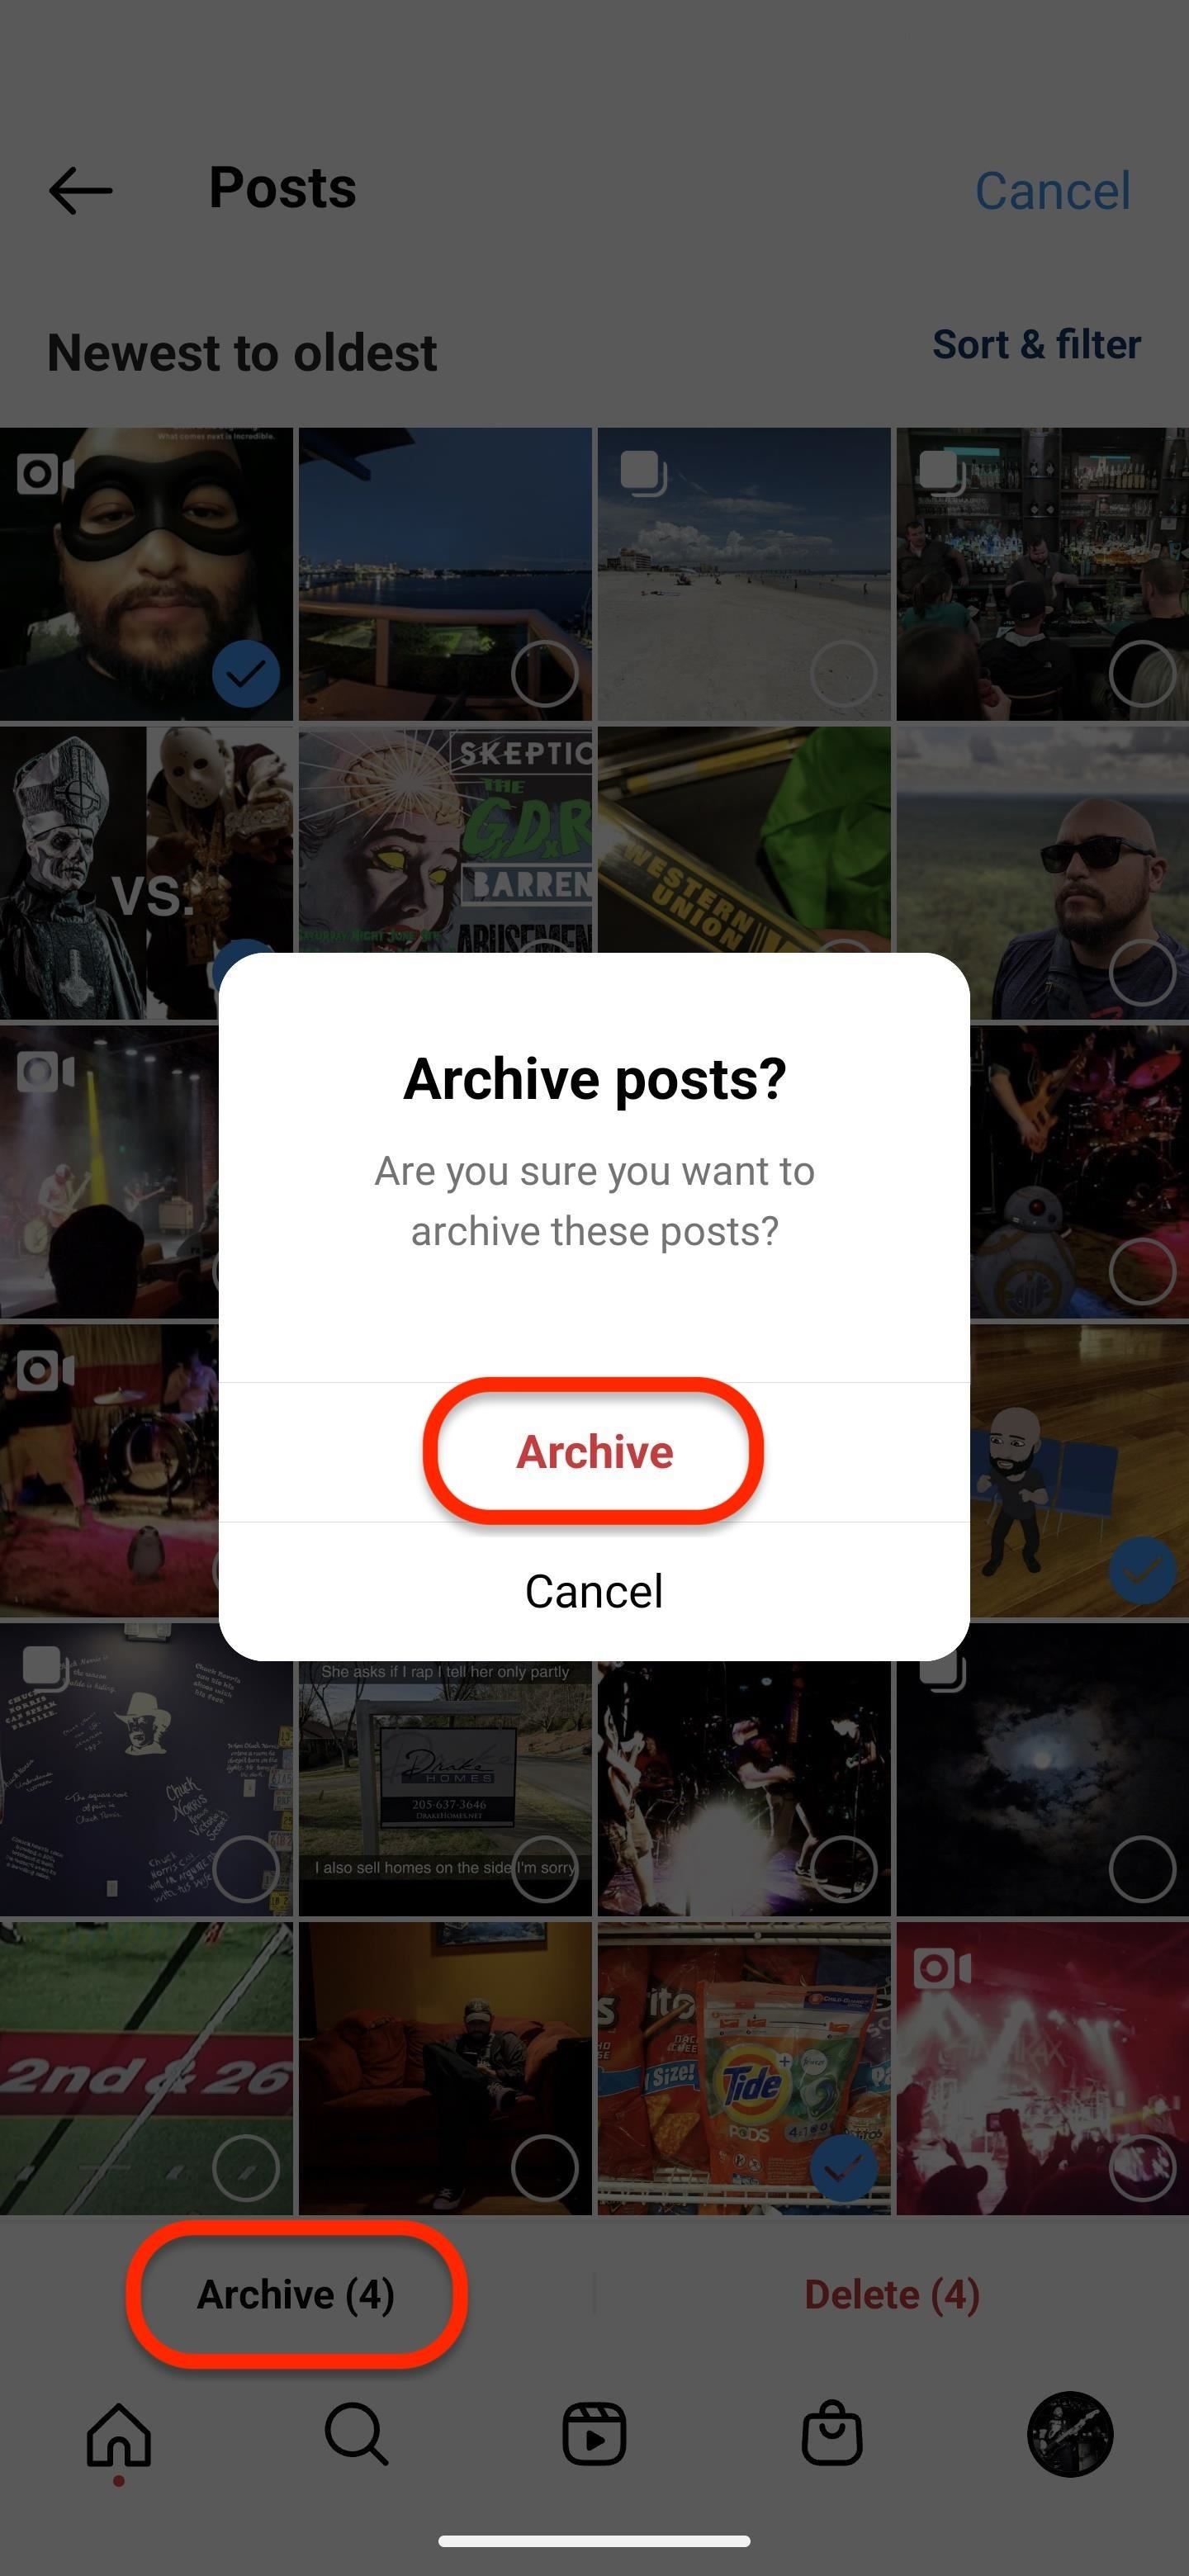 How to quickly purge your spam Instagram posts from the public eye forever or just temporarily